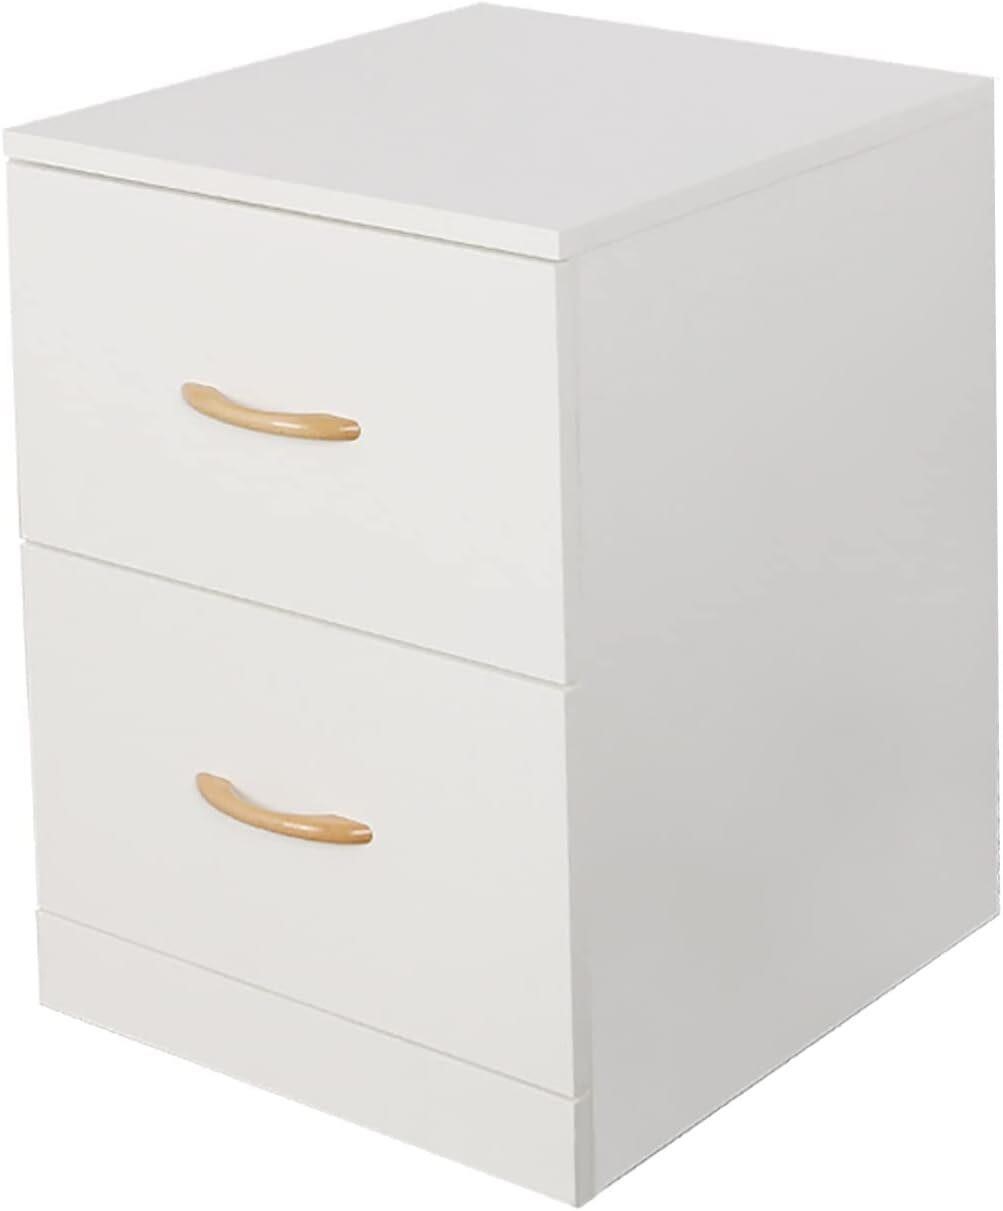 Nightstand with 2 Drawers  Bedside Table Small Dre